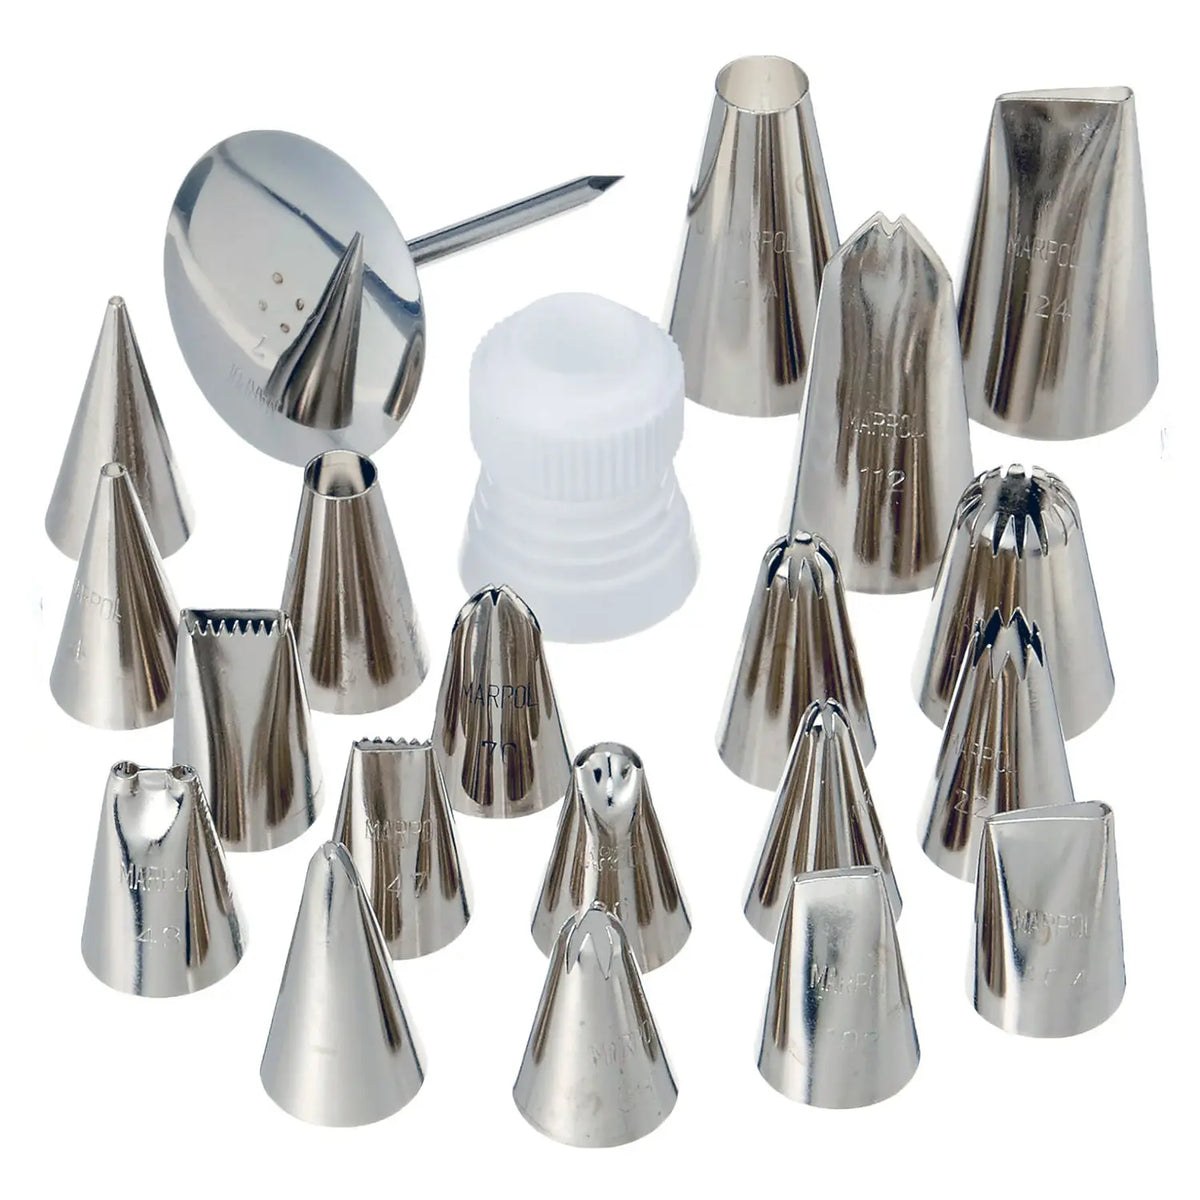 EBM Brass Piping Tips Set with Case